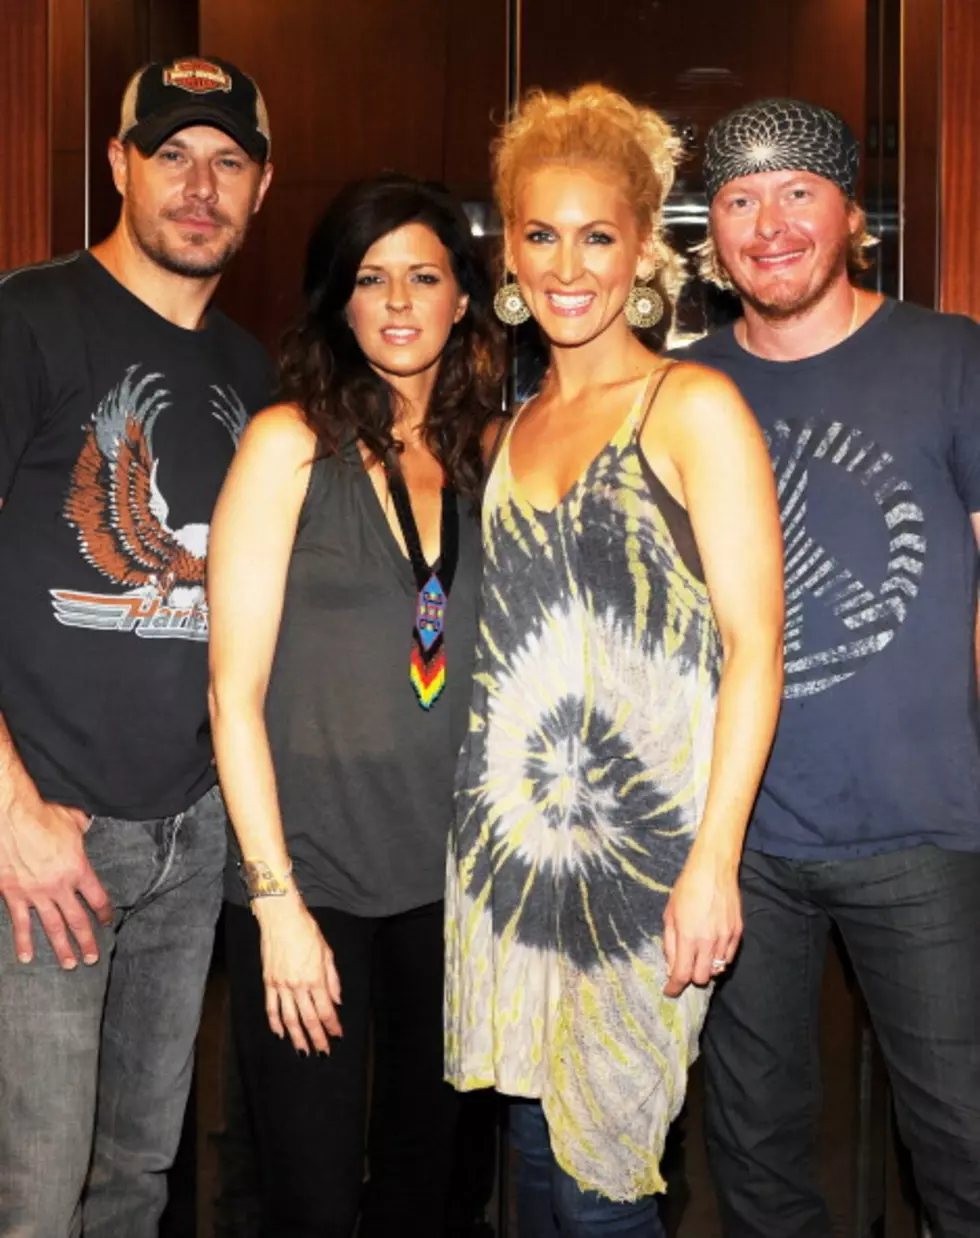 Little Big Town at The Grizzly Rose